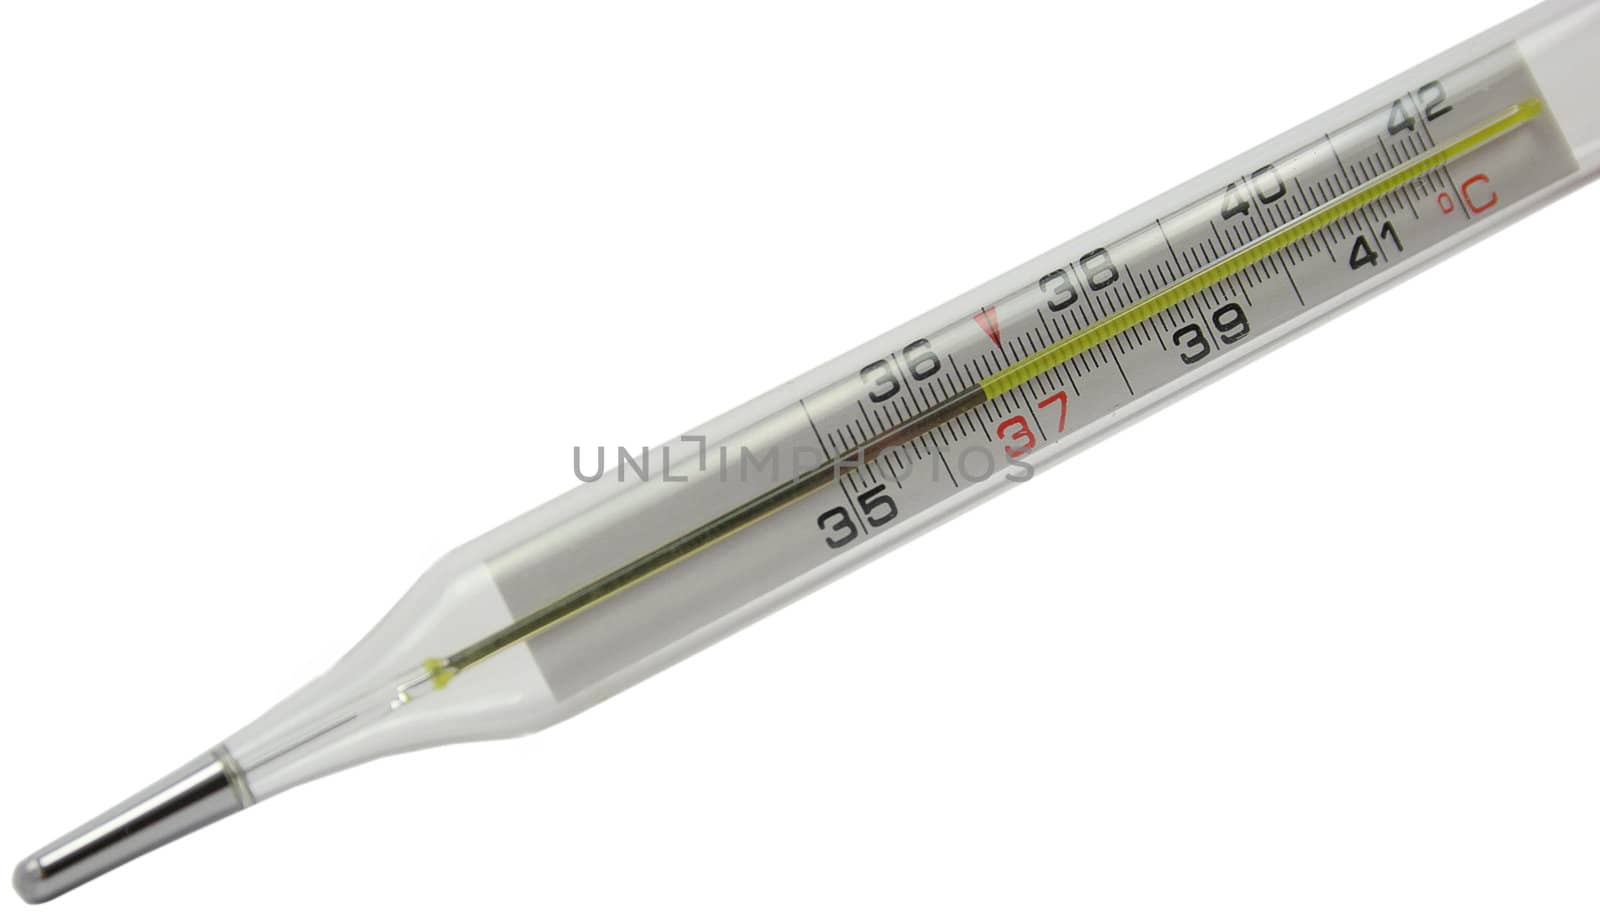 Mercurial thermometer (36,6) isolated on a white background (over white)